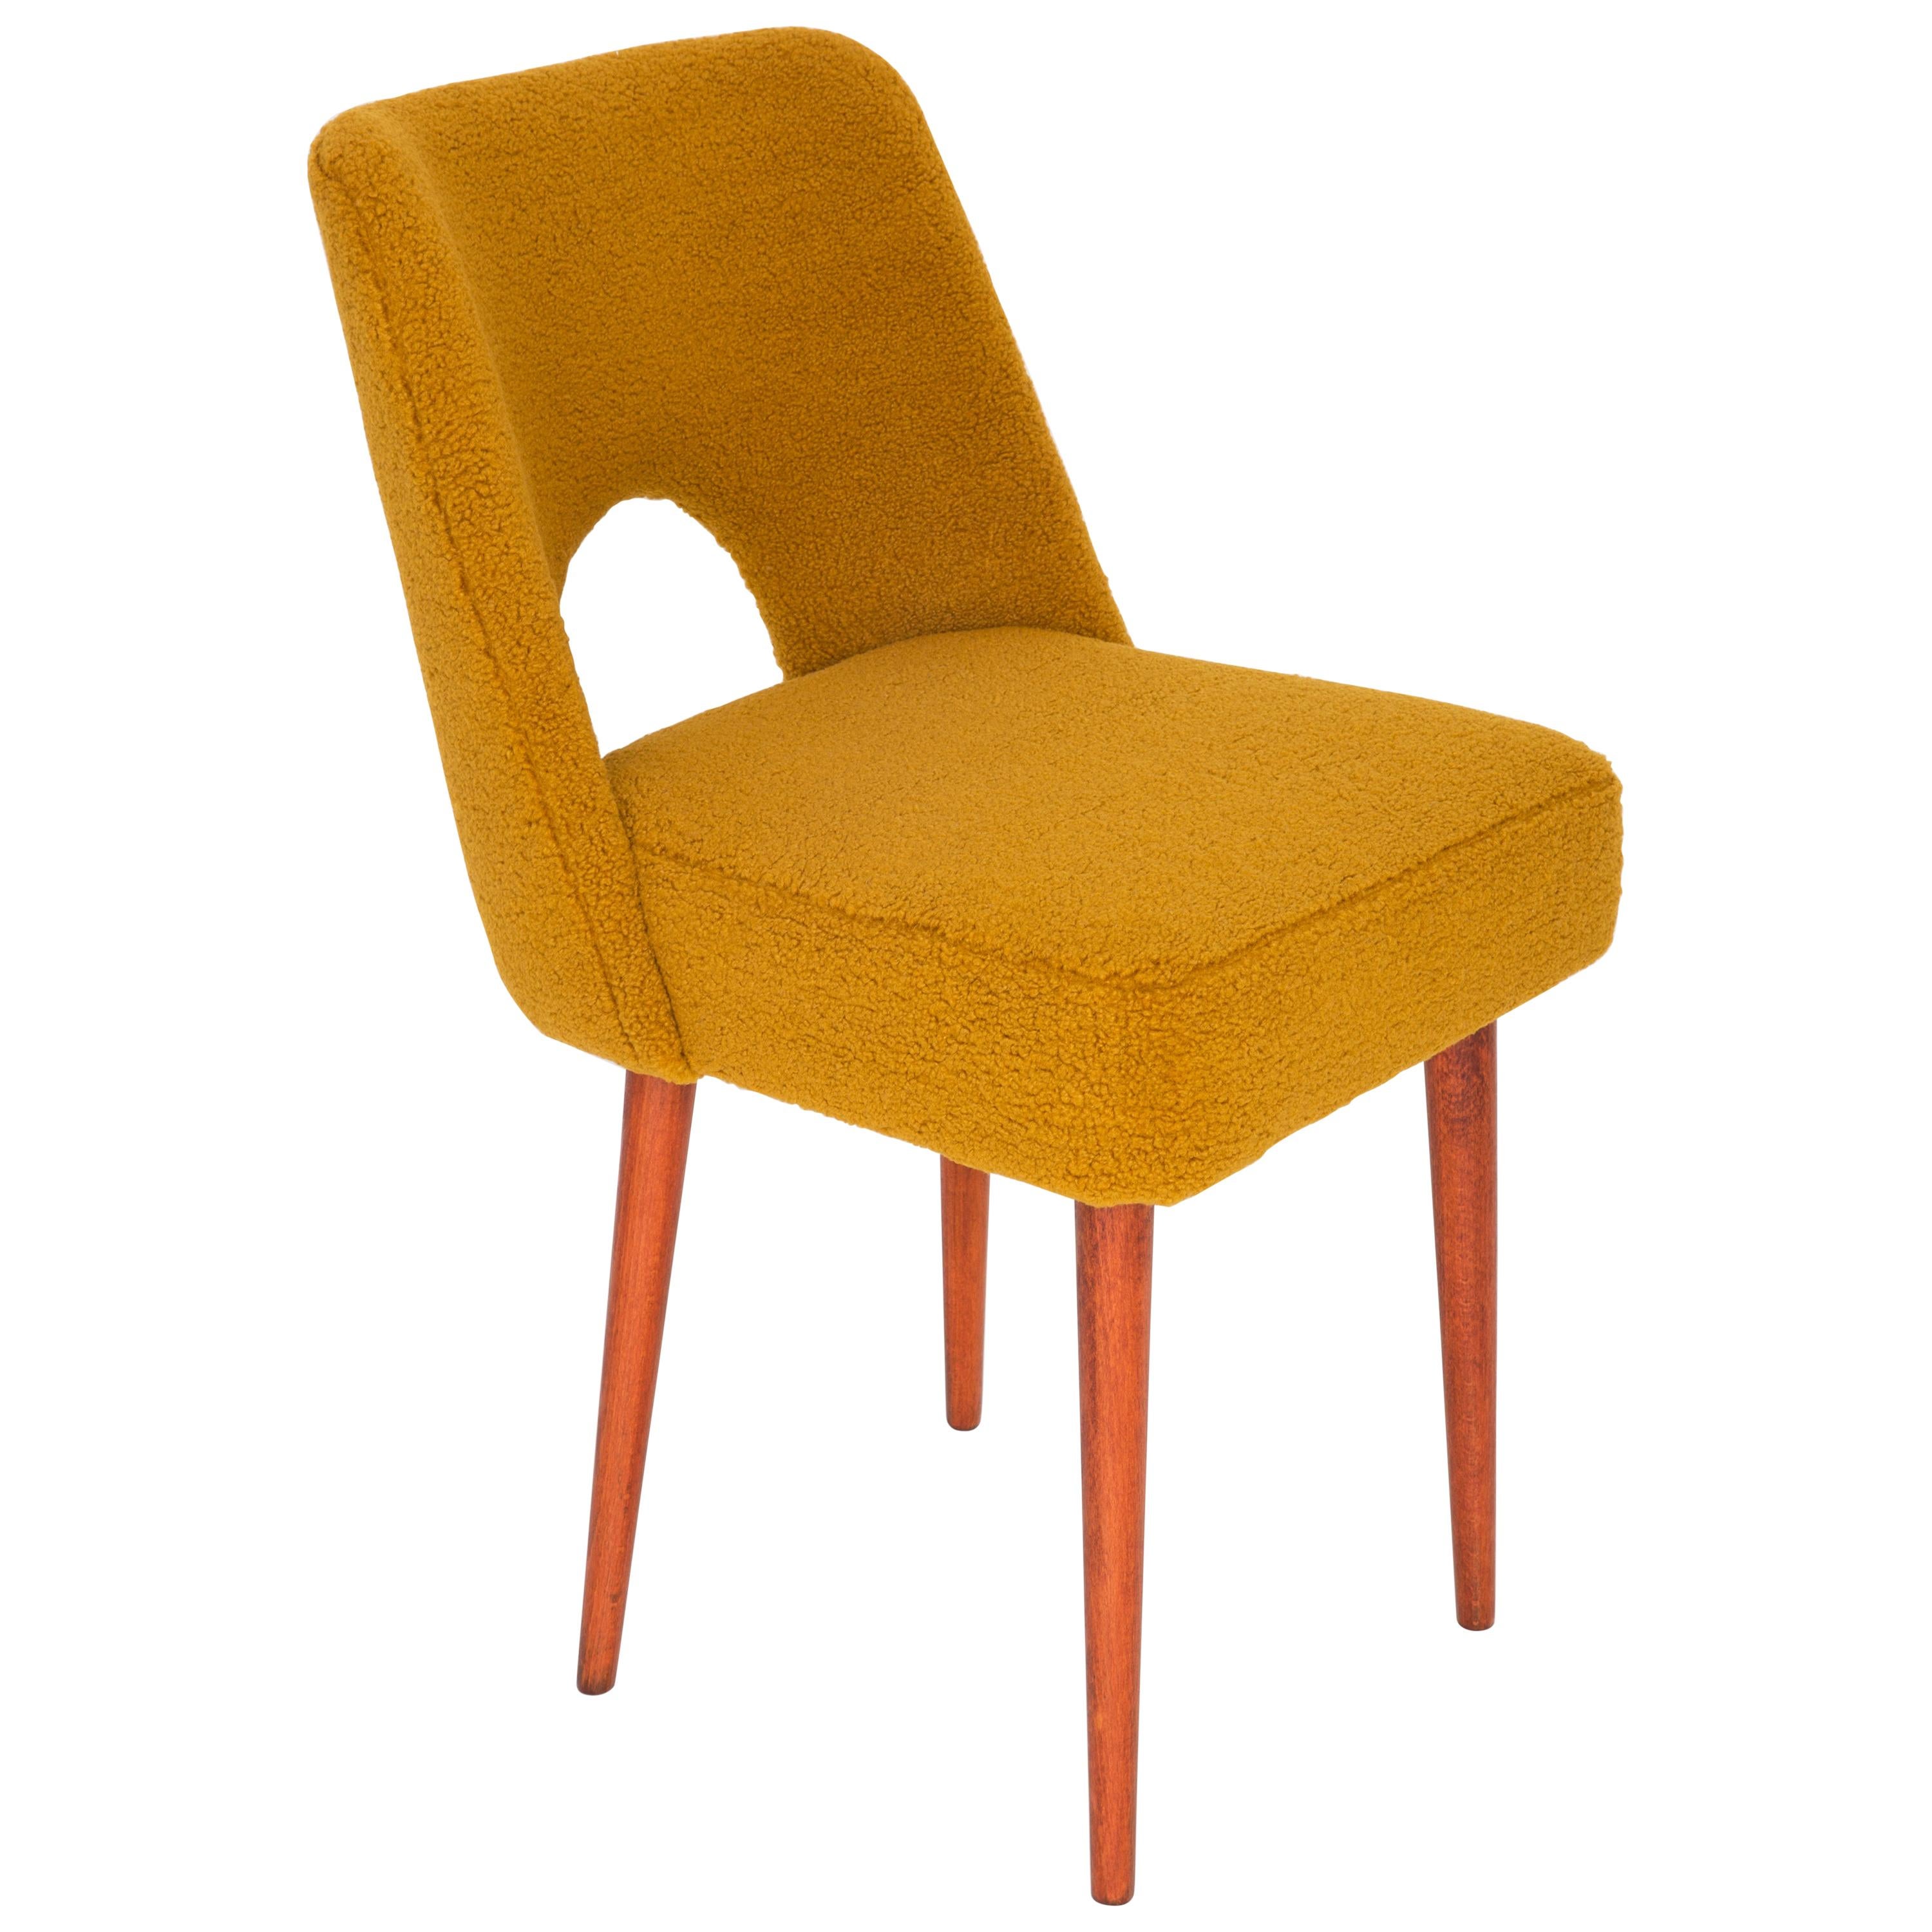 Yellow Ochre Boucle 'Shell' Chair, 1960s For Sale